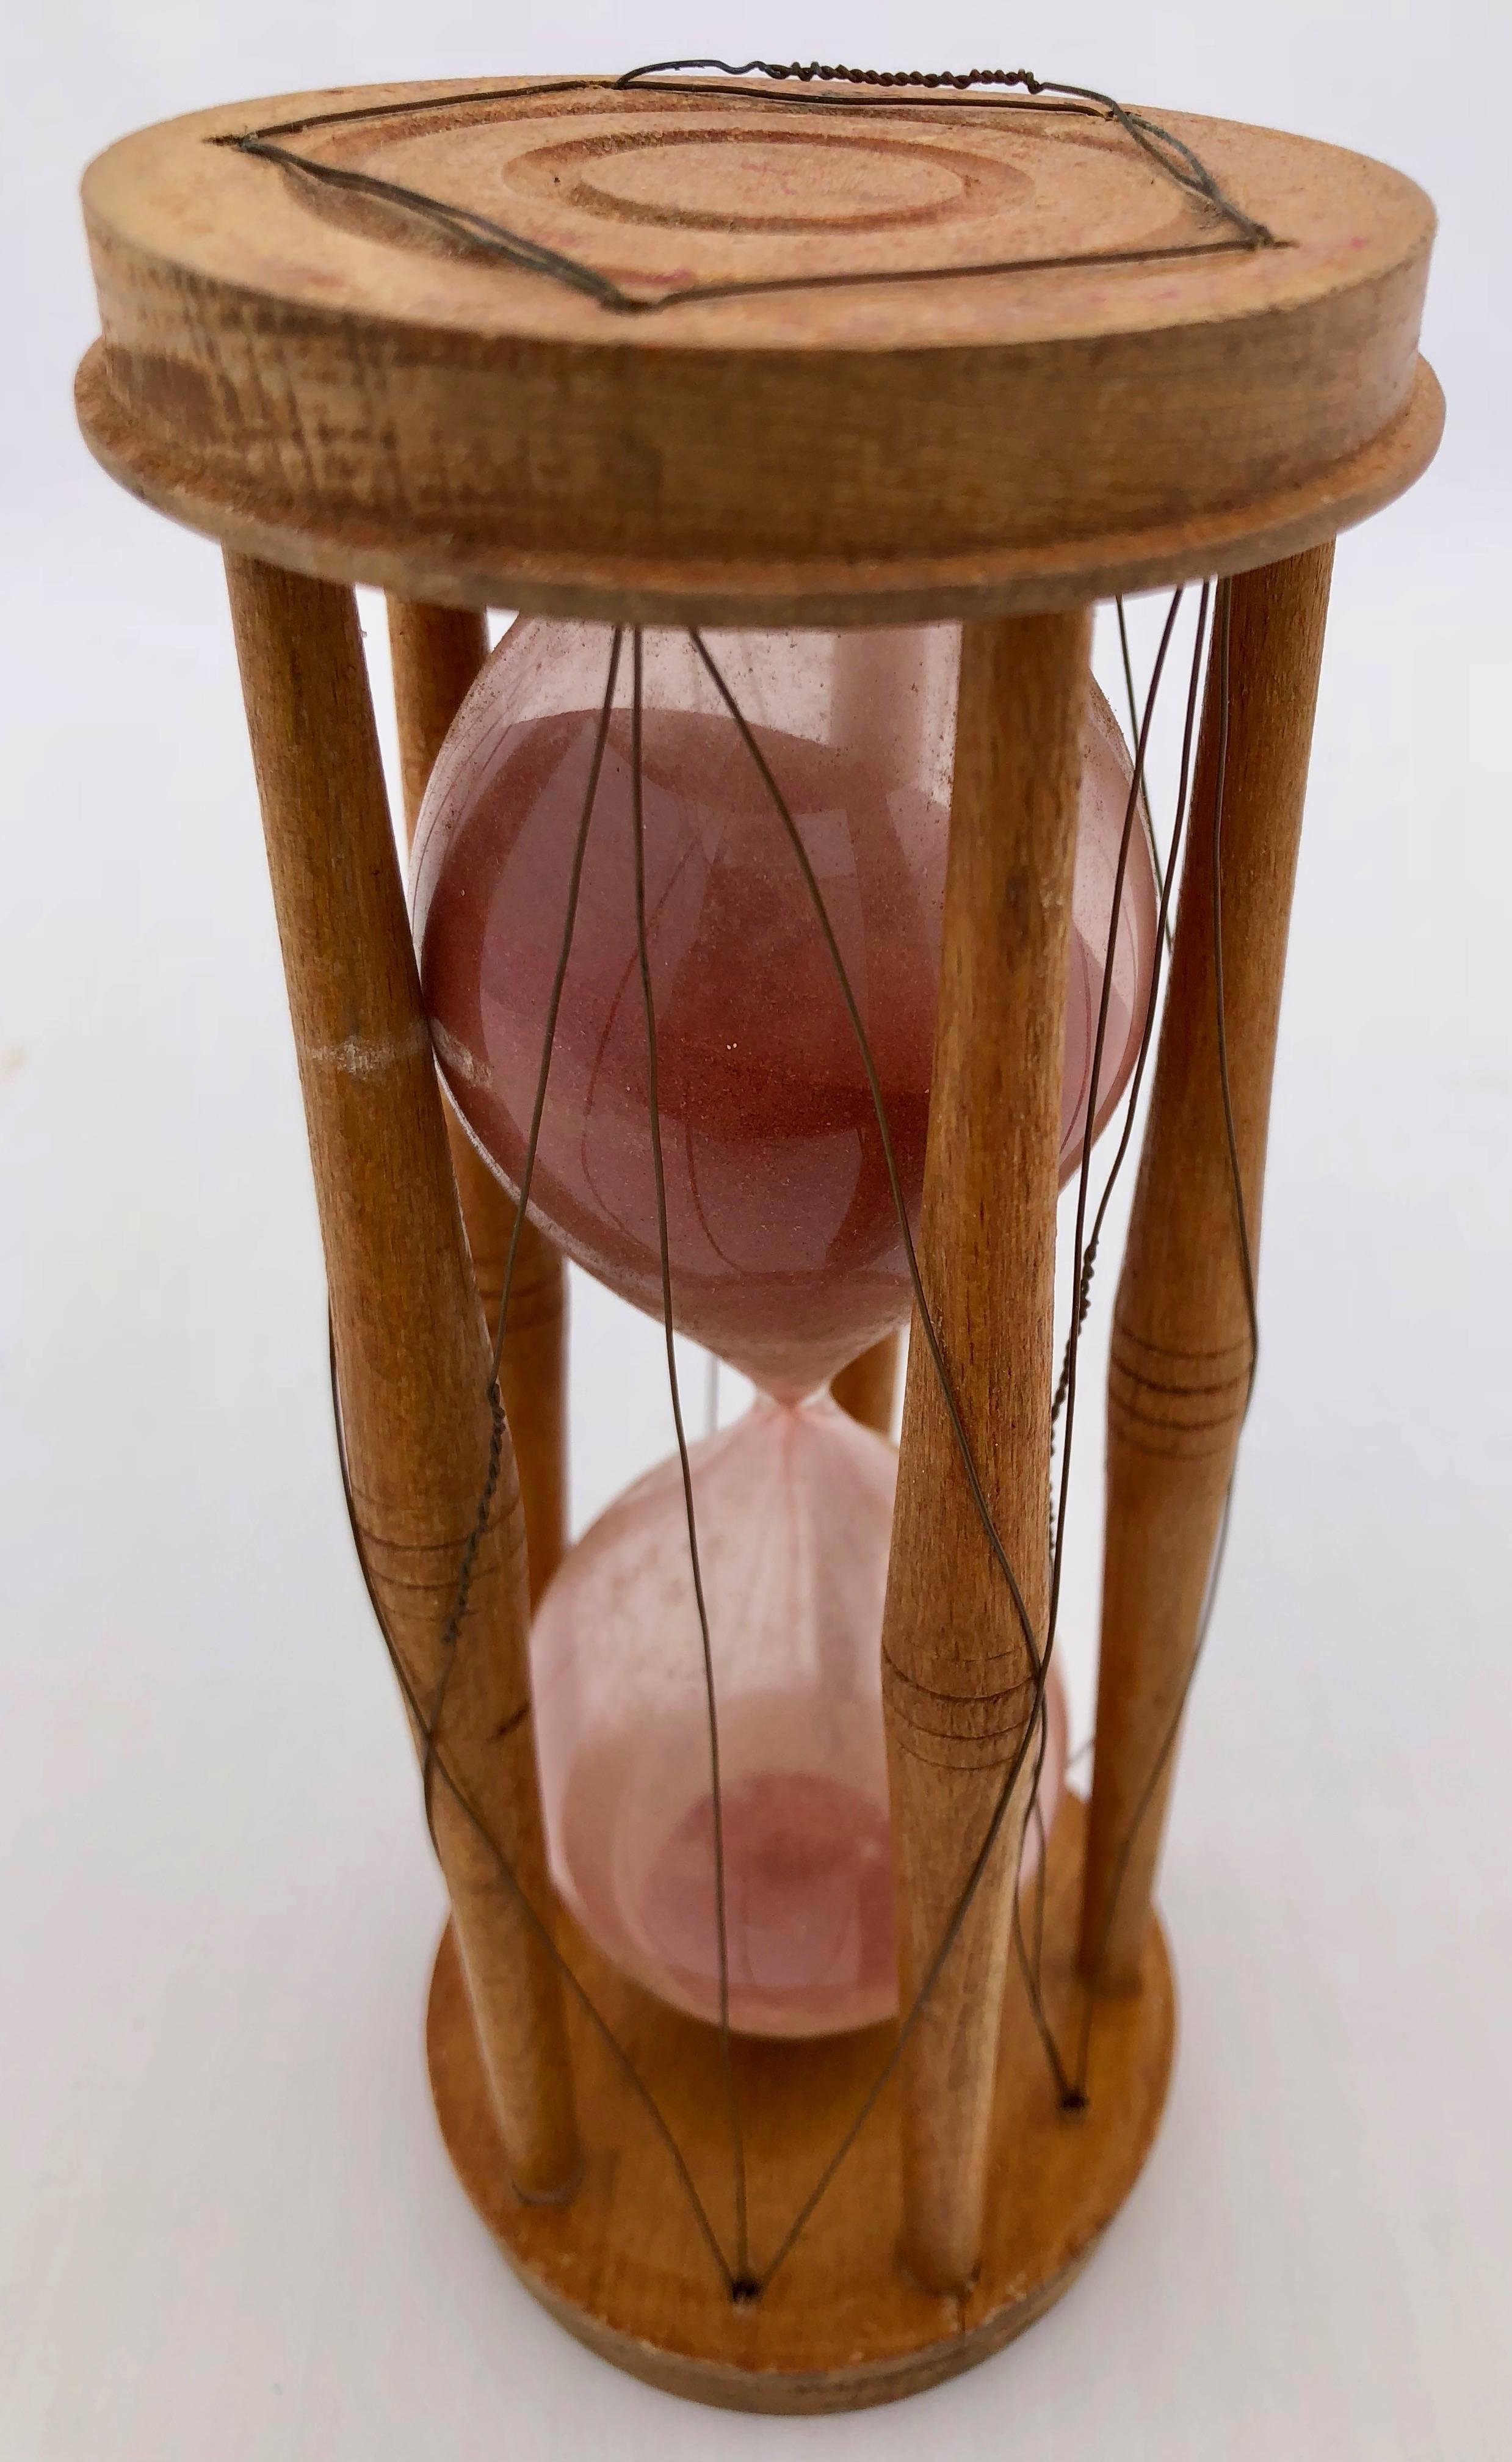 Empire Set of Three Wood and Handblown Glass Maritime Sand Timers, 18th-19th Century